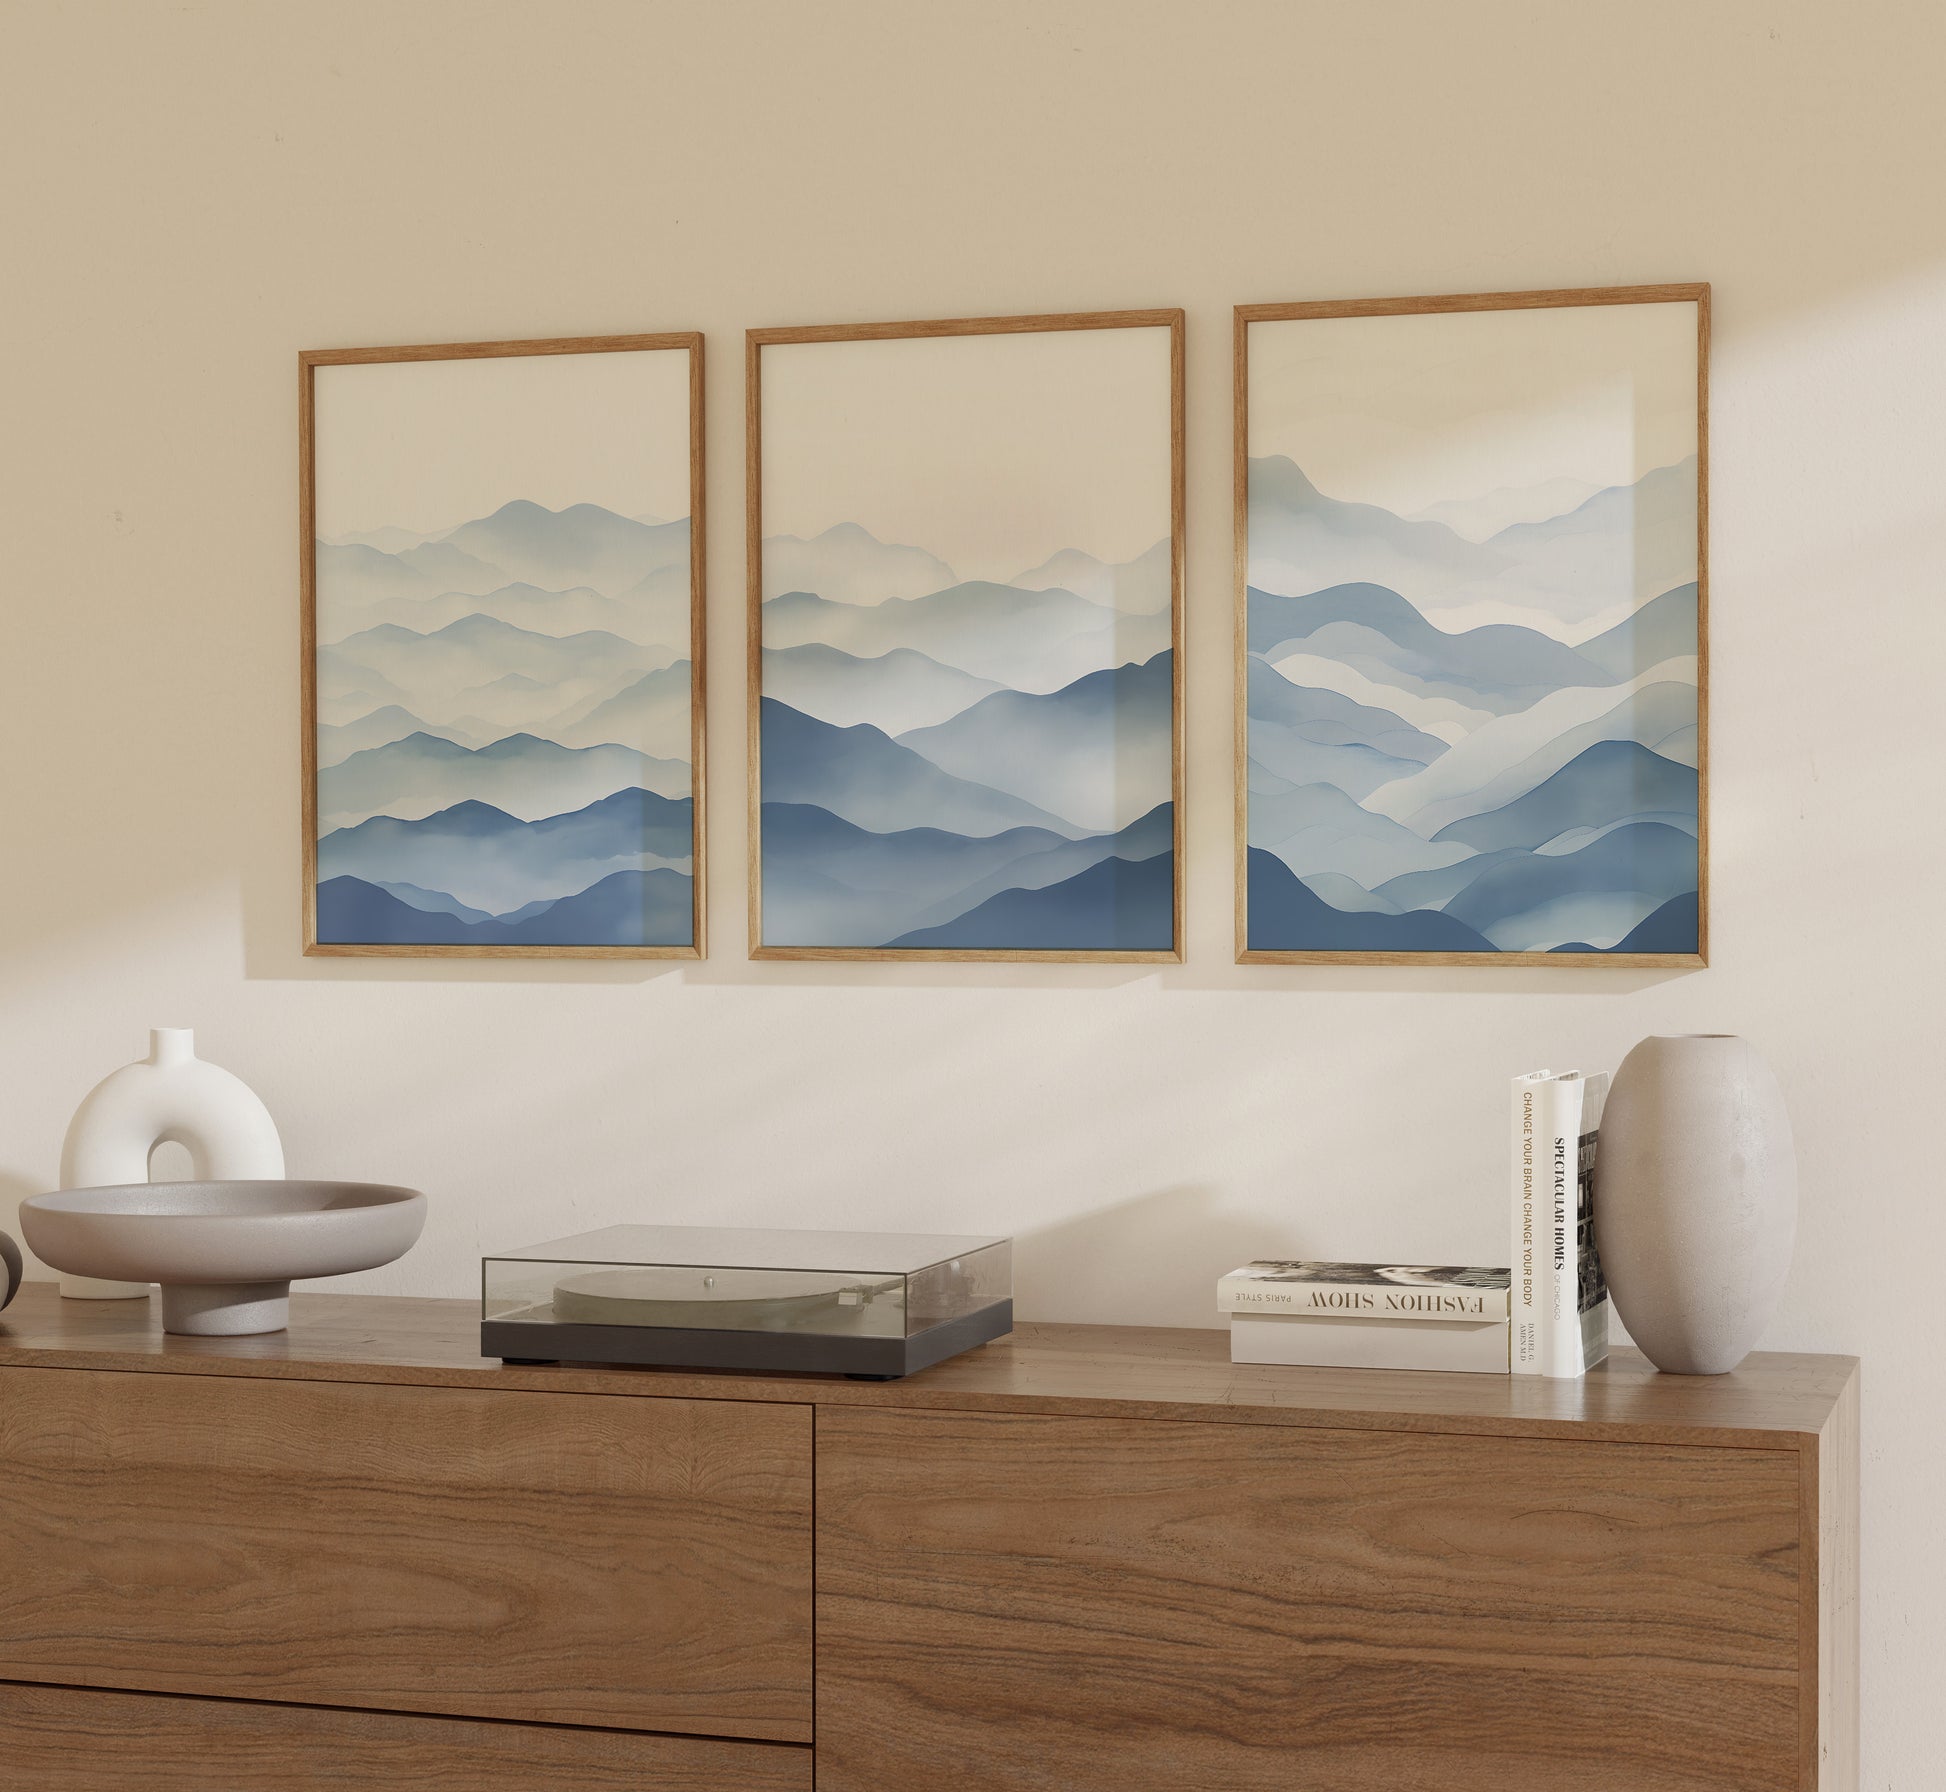 Three framed mountain landscape art pieces hanging above a wooden sideboard.